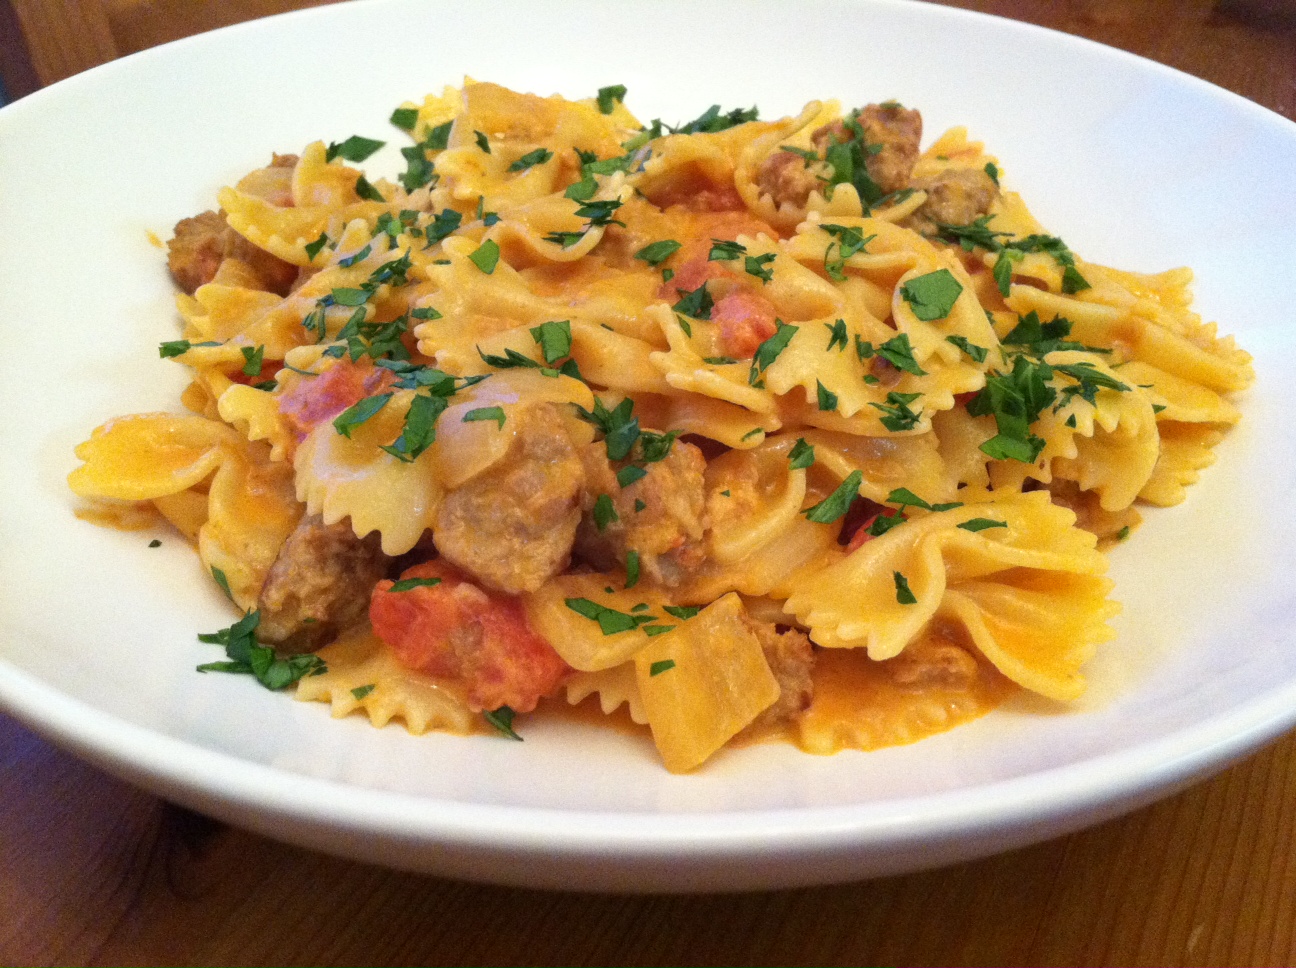 Bow ties with sausage, tomatoes and cream